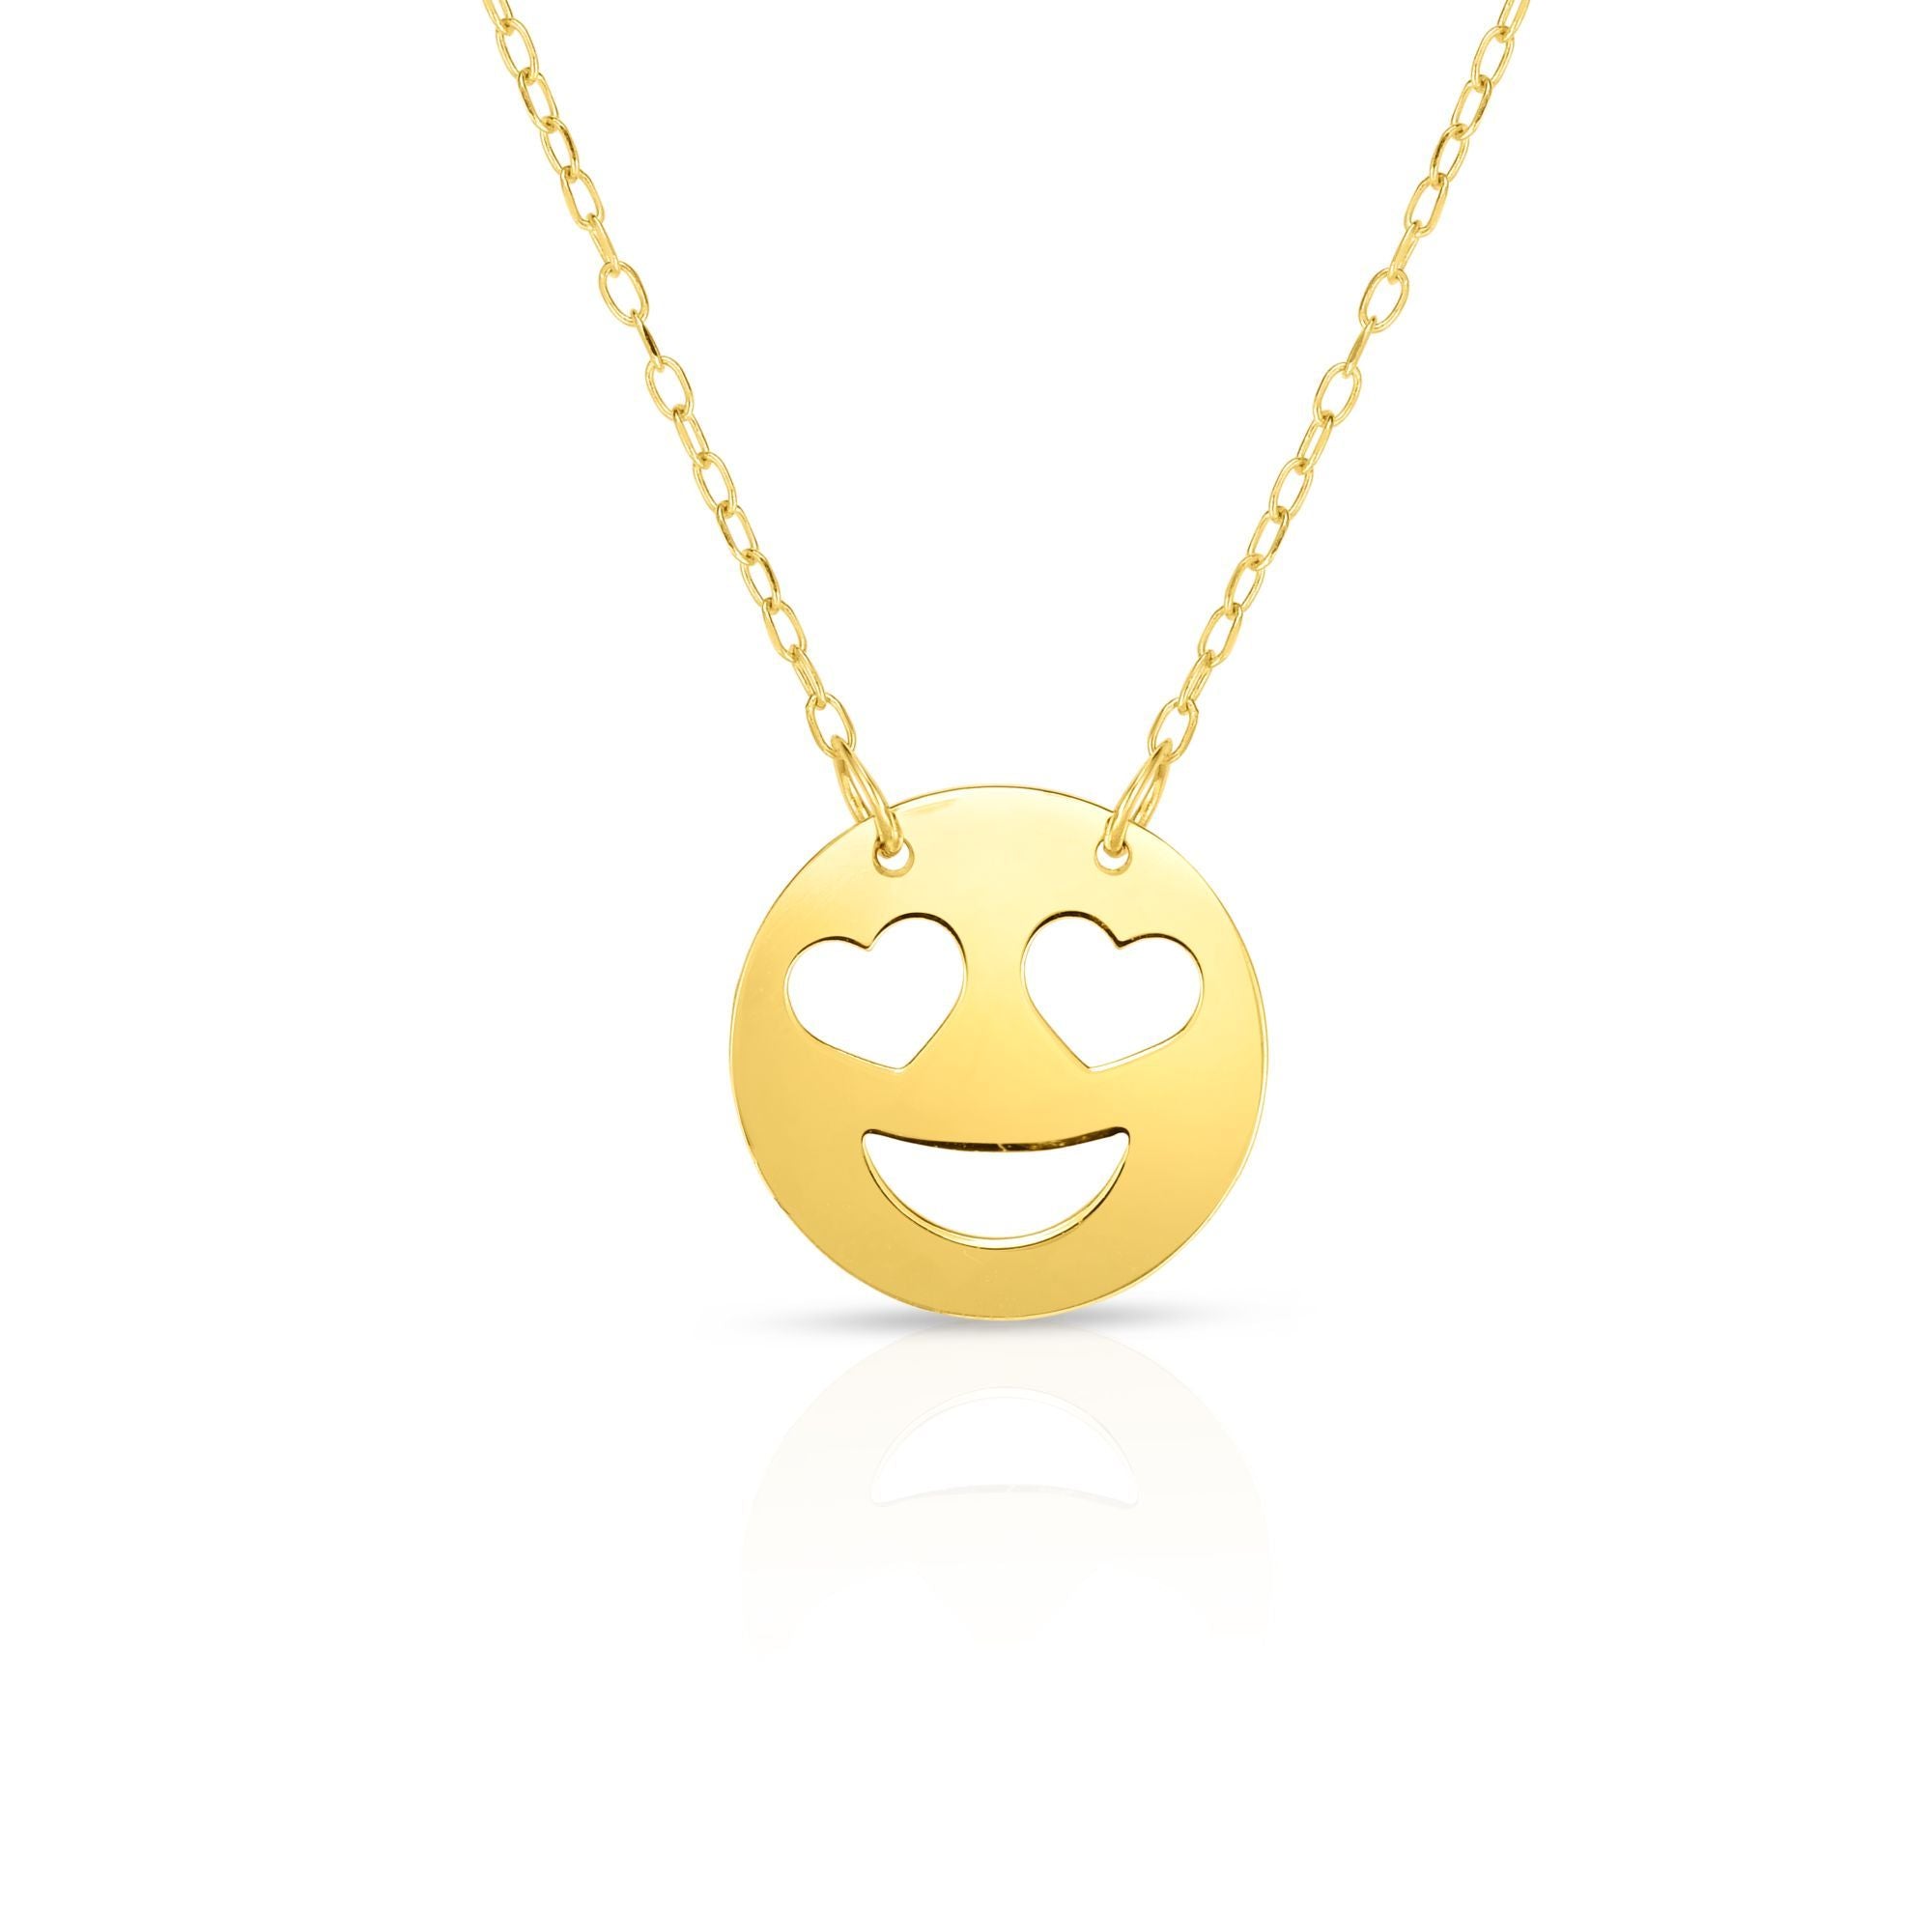 Minimalist Fancy Emoji Necklace with Cable Chain Necklace - wingroupjewelry